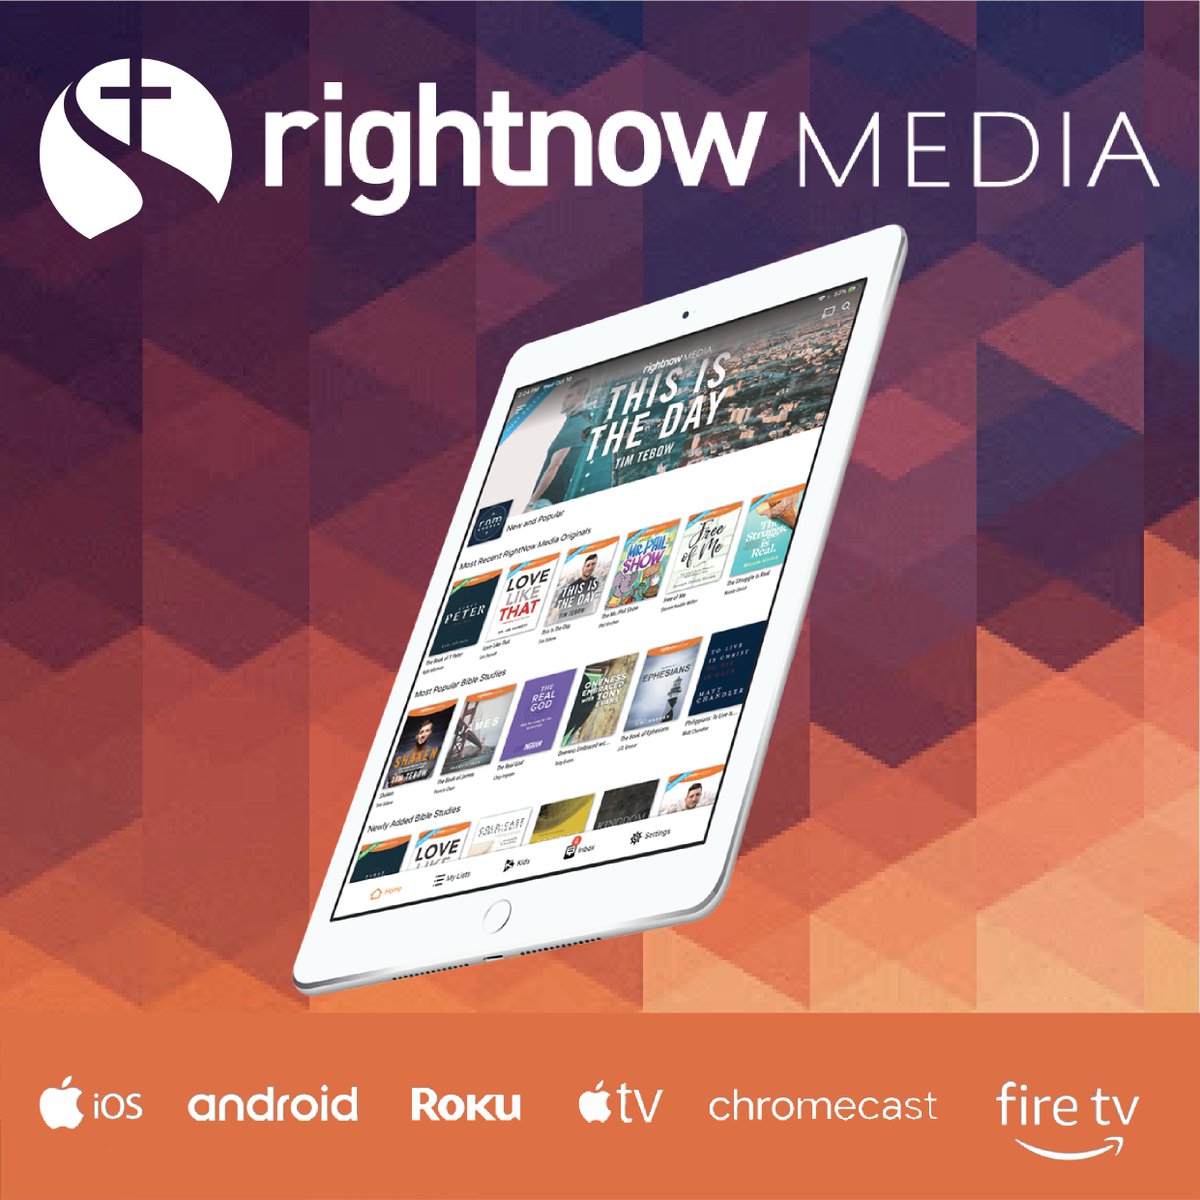 We recently shared some awesome news at Shiloh! We’re giving our members free access to @RightNowMedia, an online streaming service full of biblical content! Learn more about how to get your free access now! [ow.ly/XXbe50zGAkk]